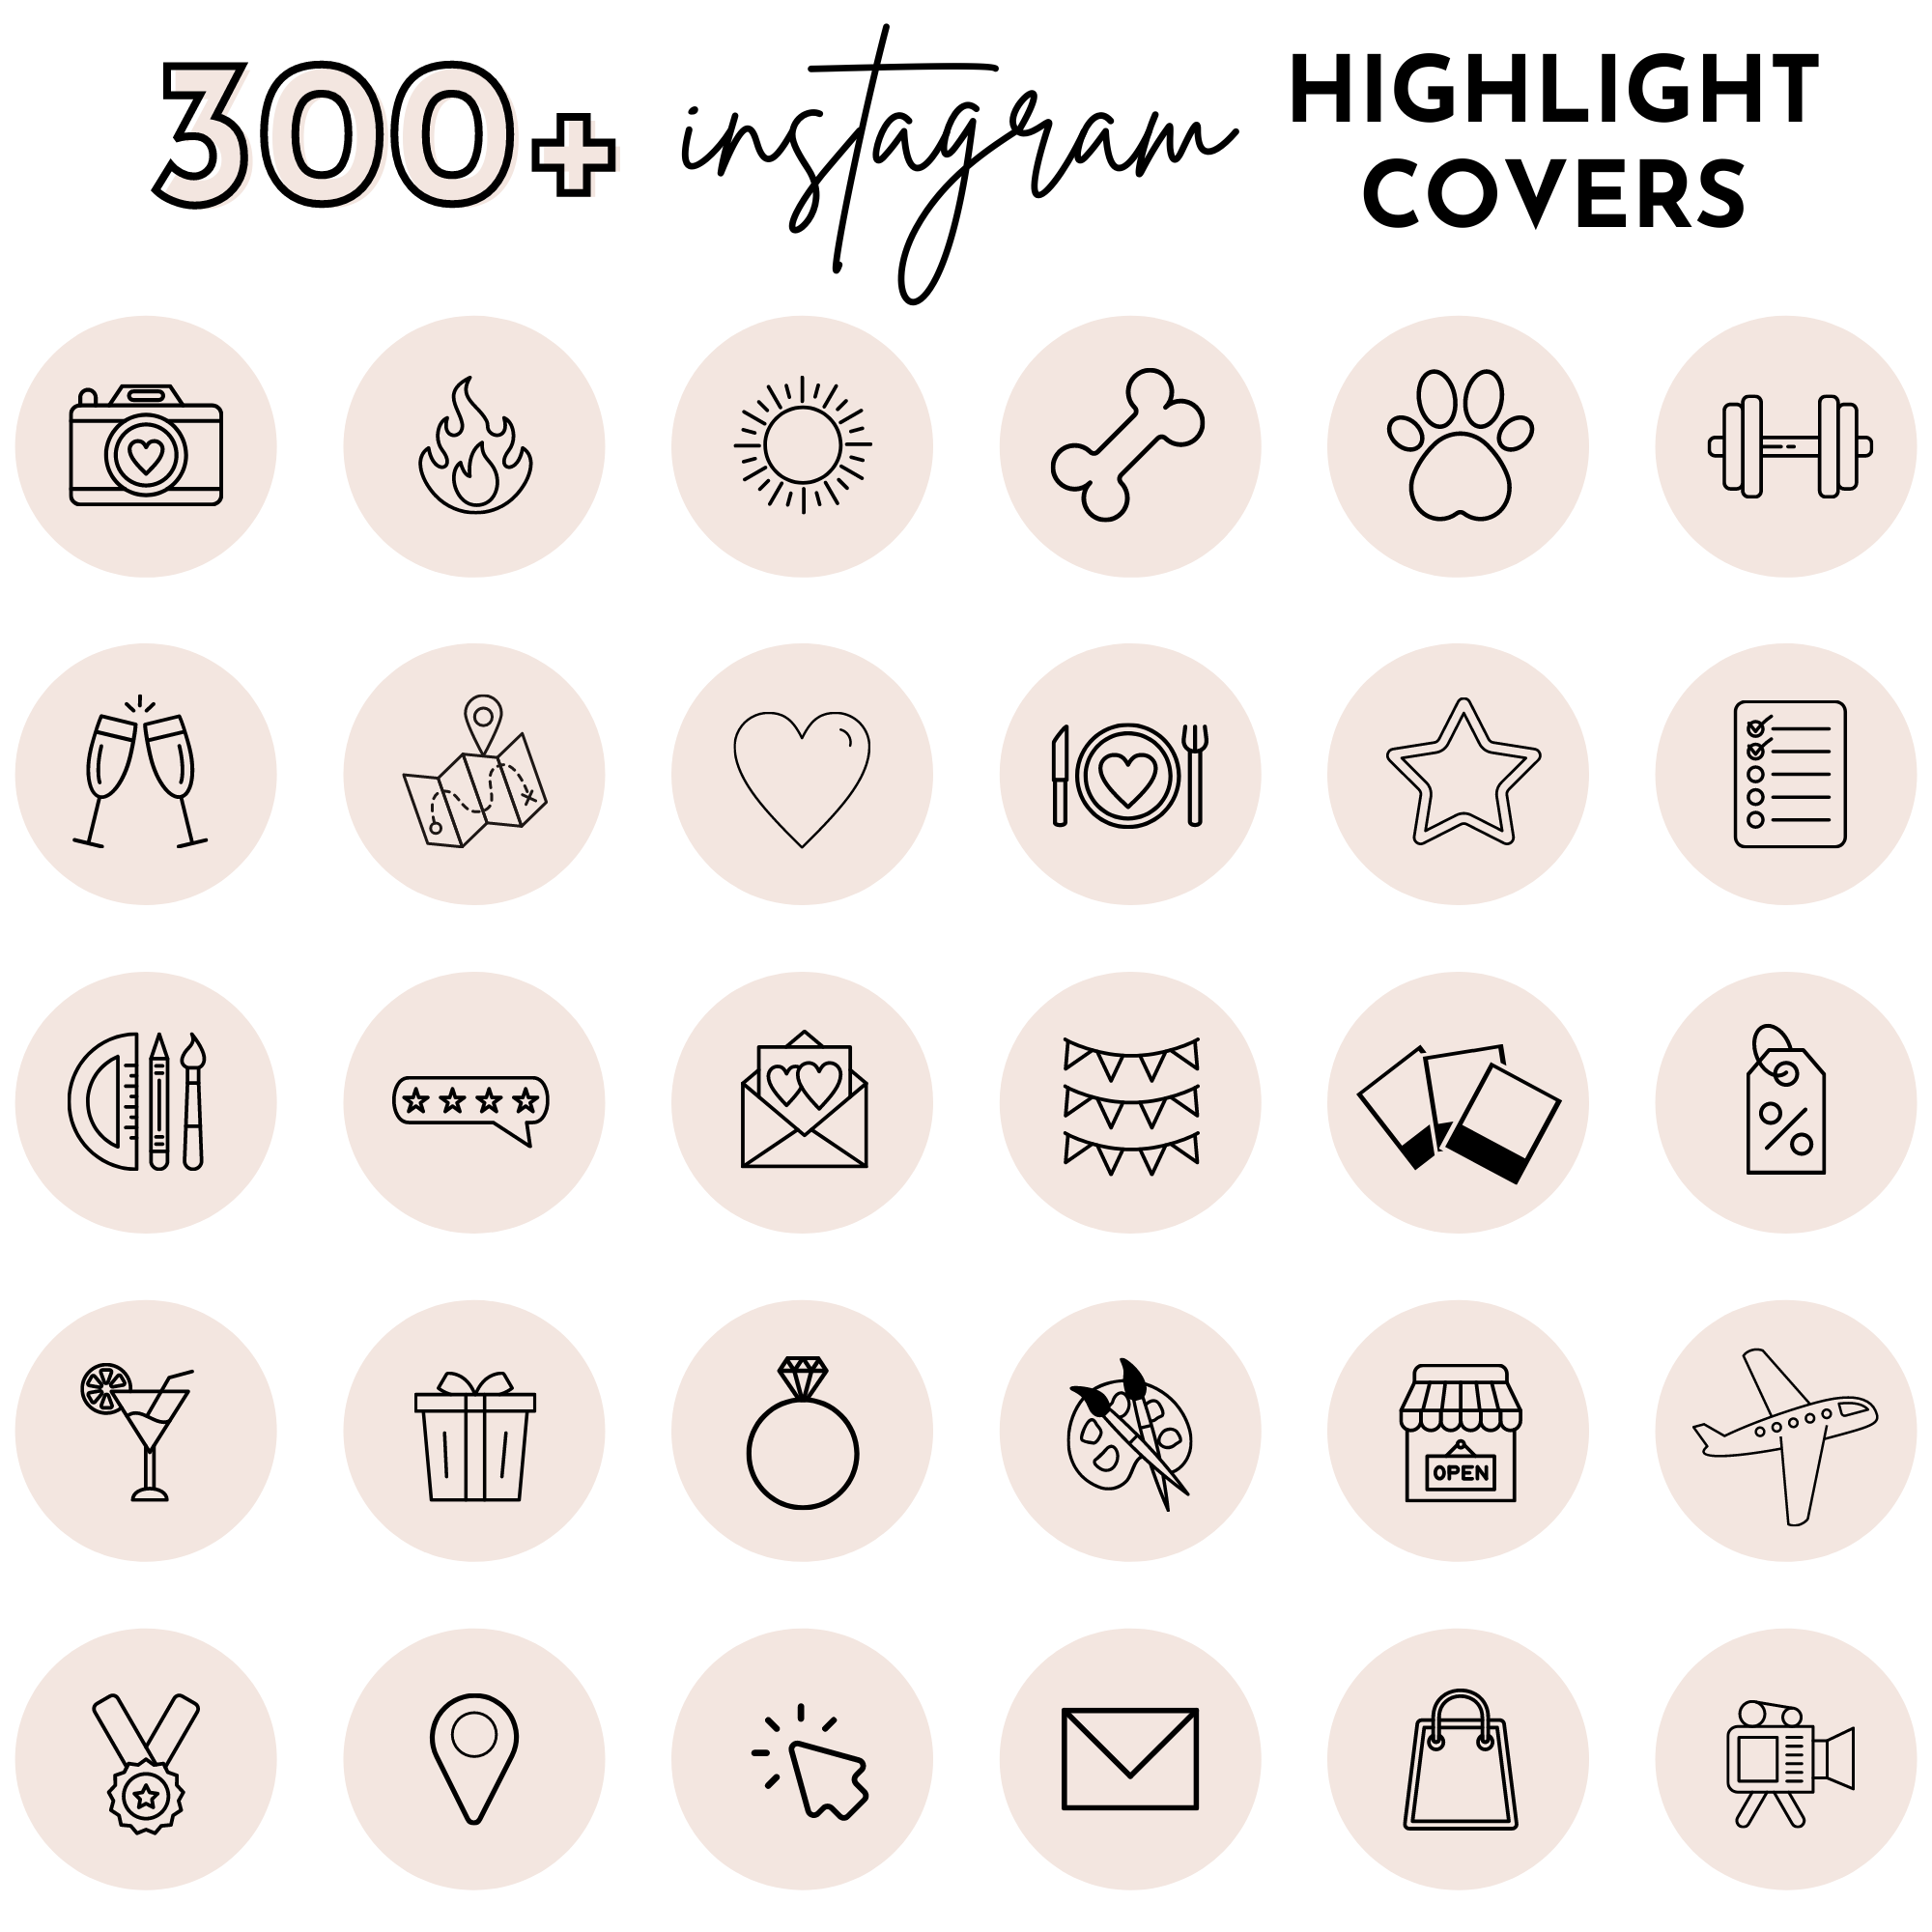 ig highlight icons different designs marbel